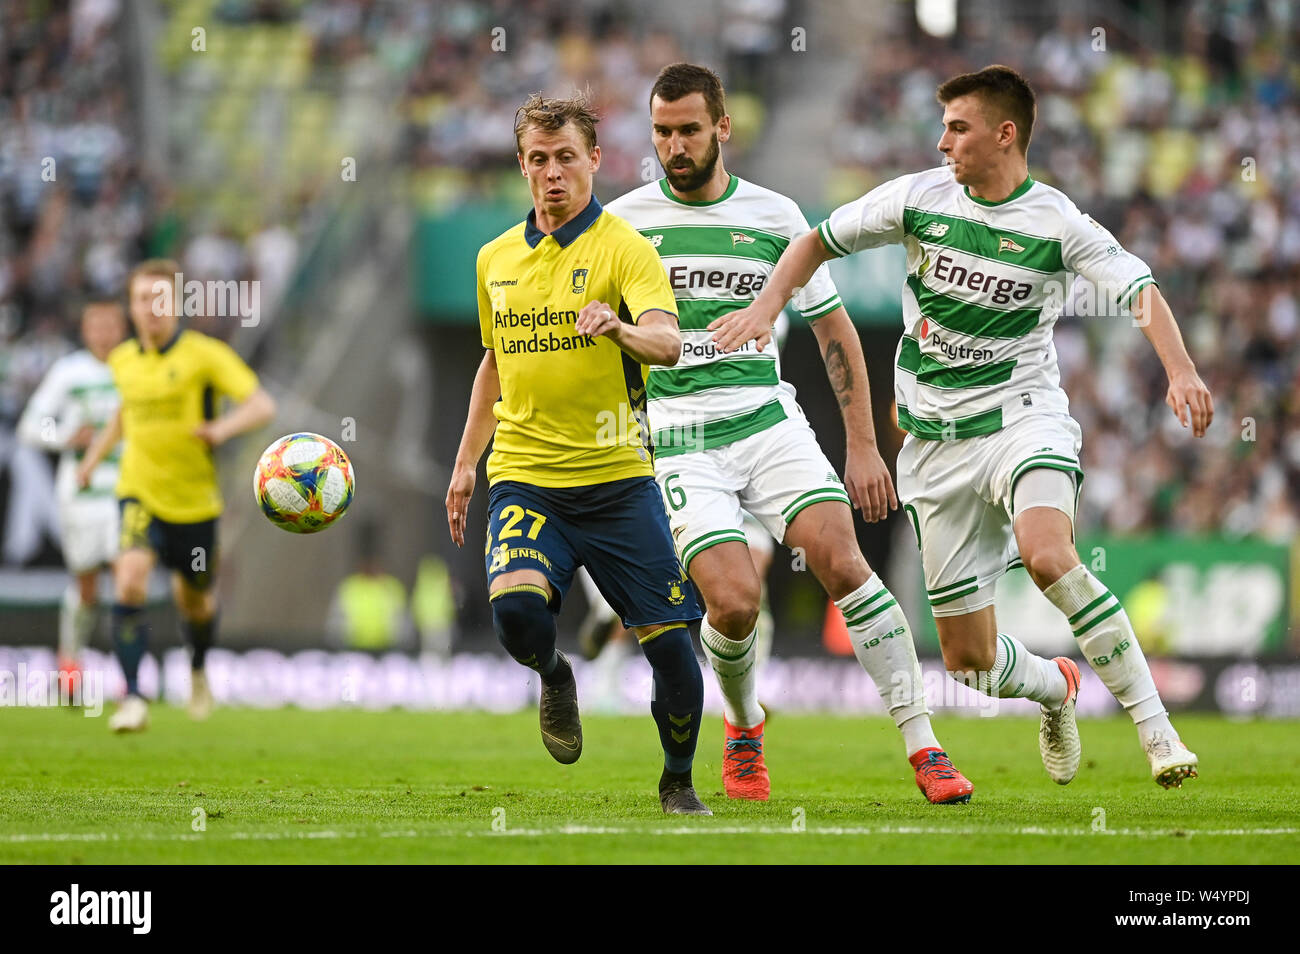 Simon Hedlund from Brondby IF (L), Blazej Augustyn from Lechia Gdansk (C) and Karol Fila from Lechia Gdansk (R) are seen in action during the UEFA Europa League Qualifiers match between Lechia Gdansk and Brondby IF at Energa Stadium.(Final score; Lechia Gdansk 2:1 Brondby IF) Stock Photo